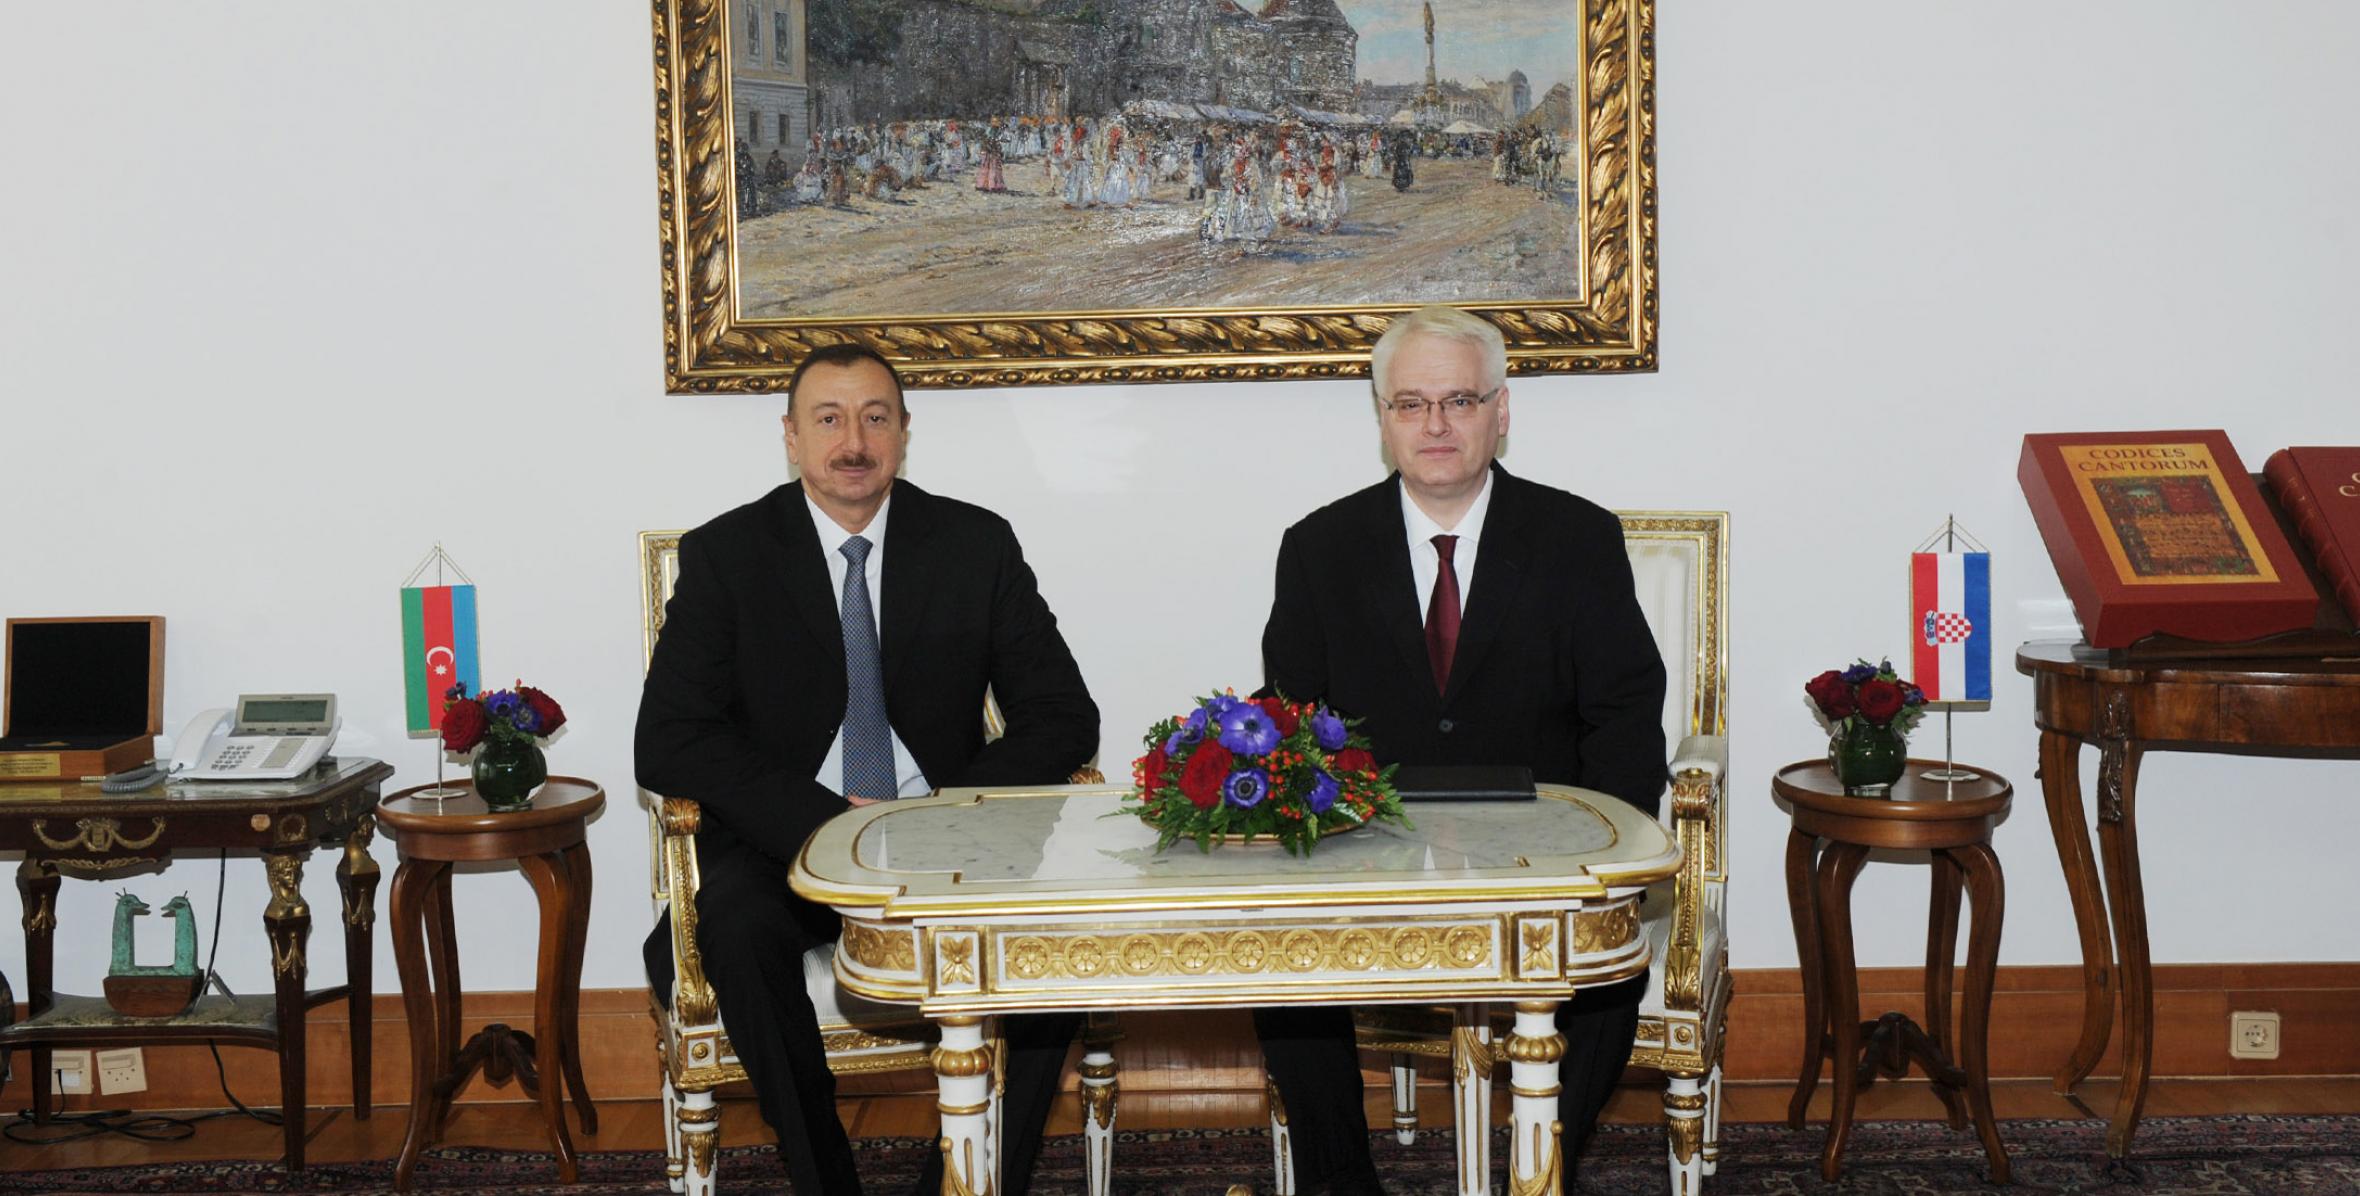 Ilham Aliyev and President of the Republic of Croatia Ivo Josipović held a one-on-one meeting